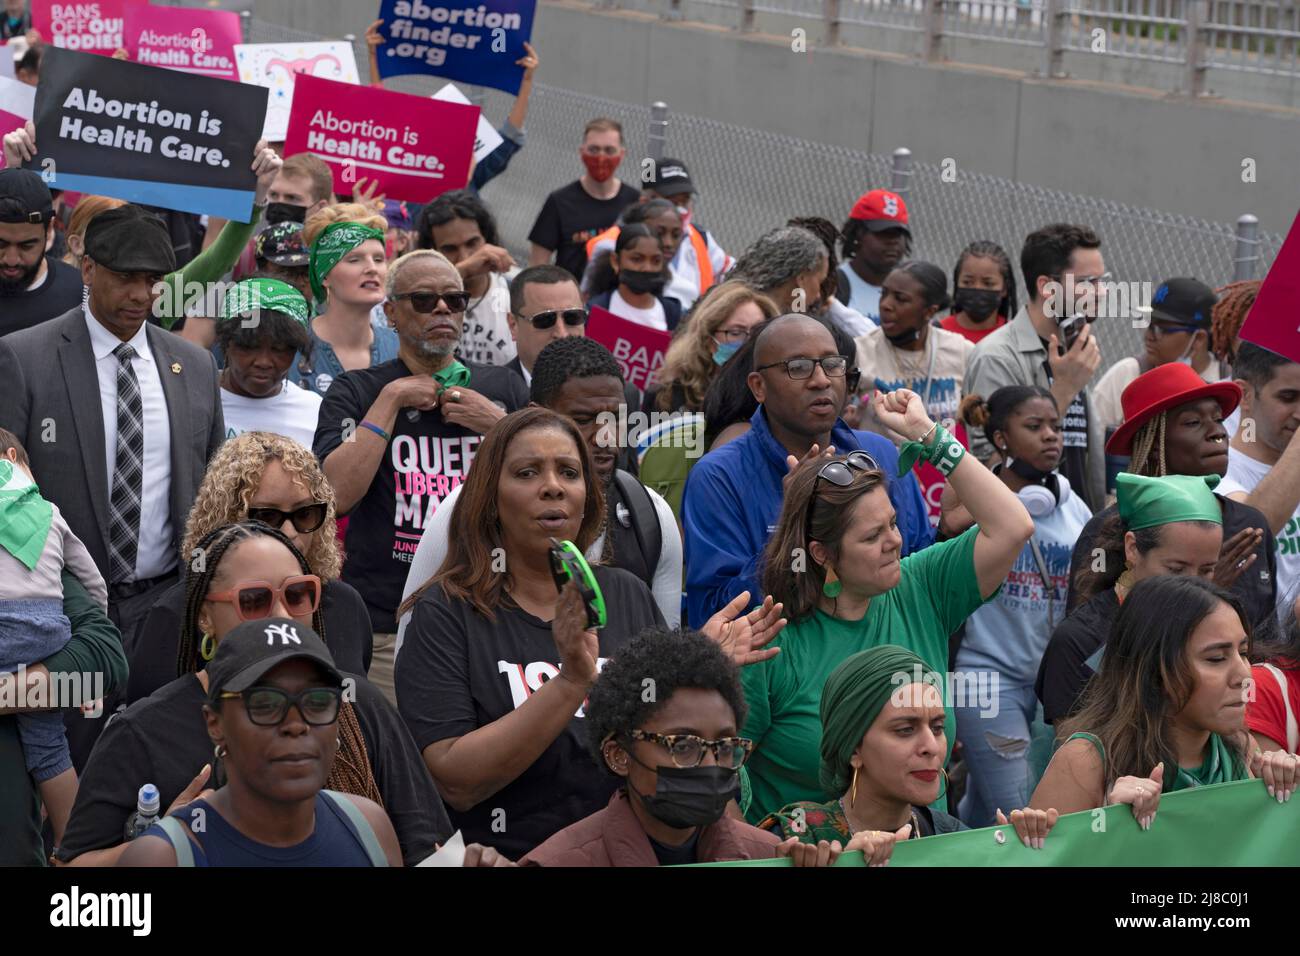 NY Attorney General Letitia James (Second row center), Donovan Richards and Jumaane Williams participate in the Planned Parenthood's 'Bans Off Our Bodies' rally and march from Cadman Plaza across the Brooklyn Bridge to Foley Square in Lower Manhattan in New York City. Abortion rights supporters are holding rallies across the country urging lawmakers to codify abortion rights into law after a leaked draft from the Supreme Court revealed a potential decision to overturn the precedent set by landmark Roe v. Wade. Stock Photo